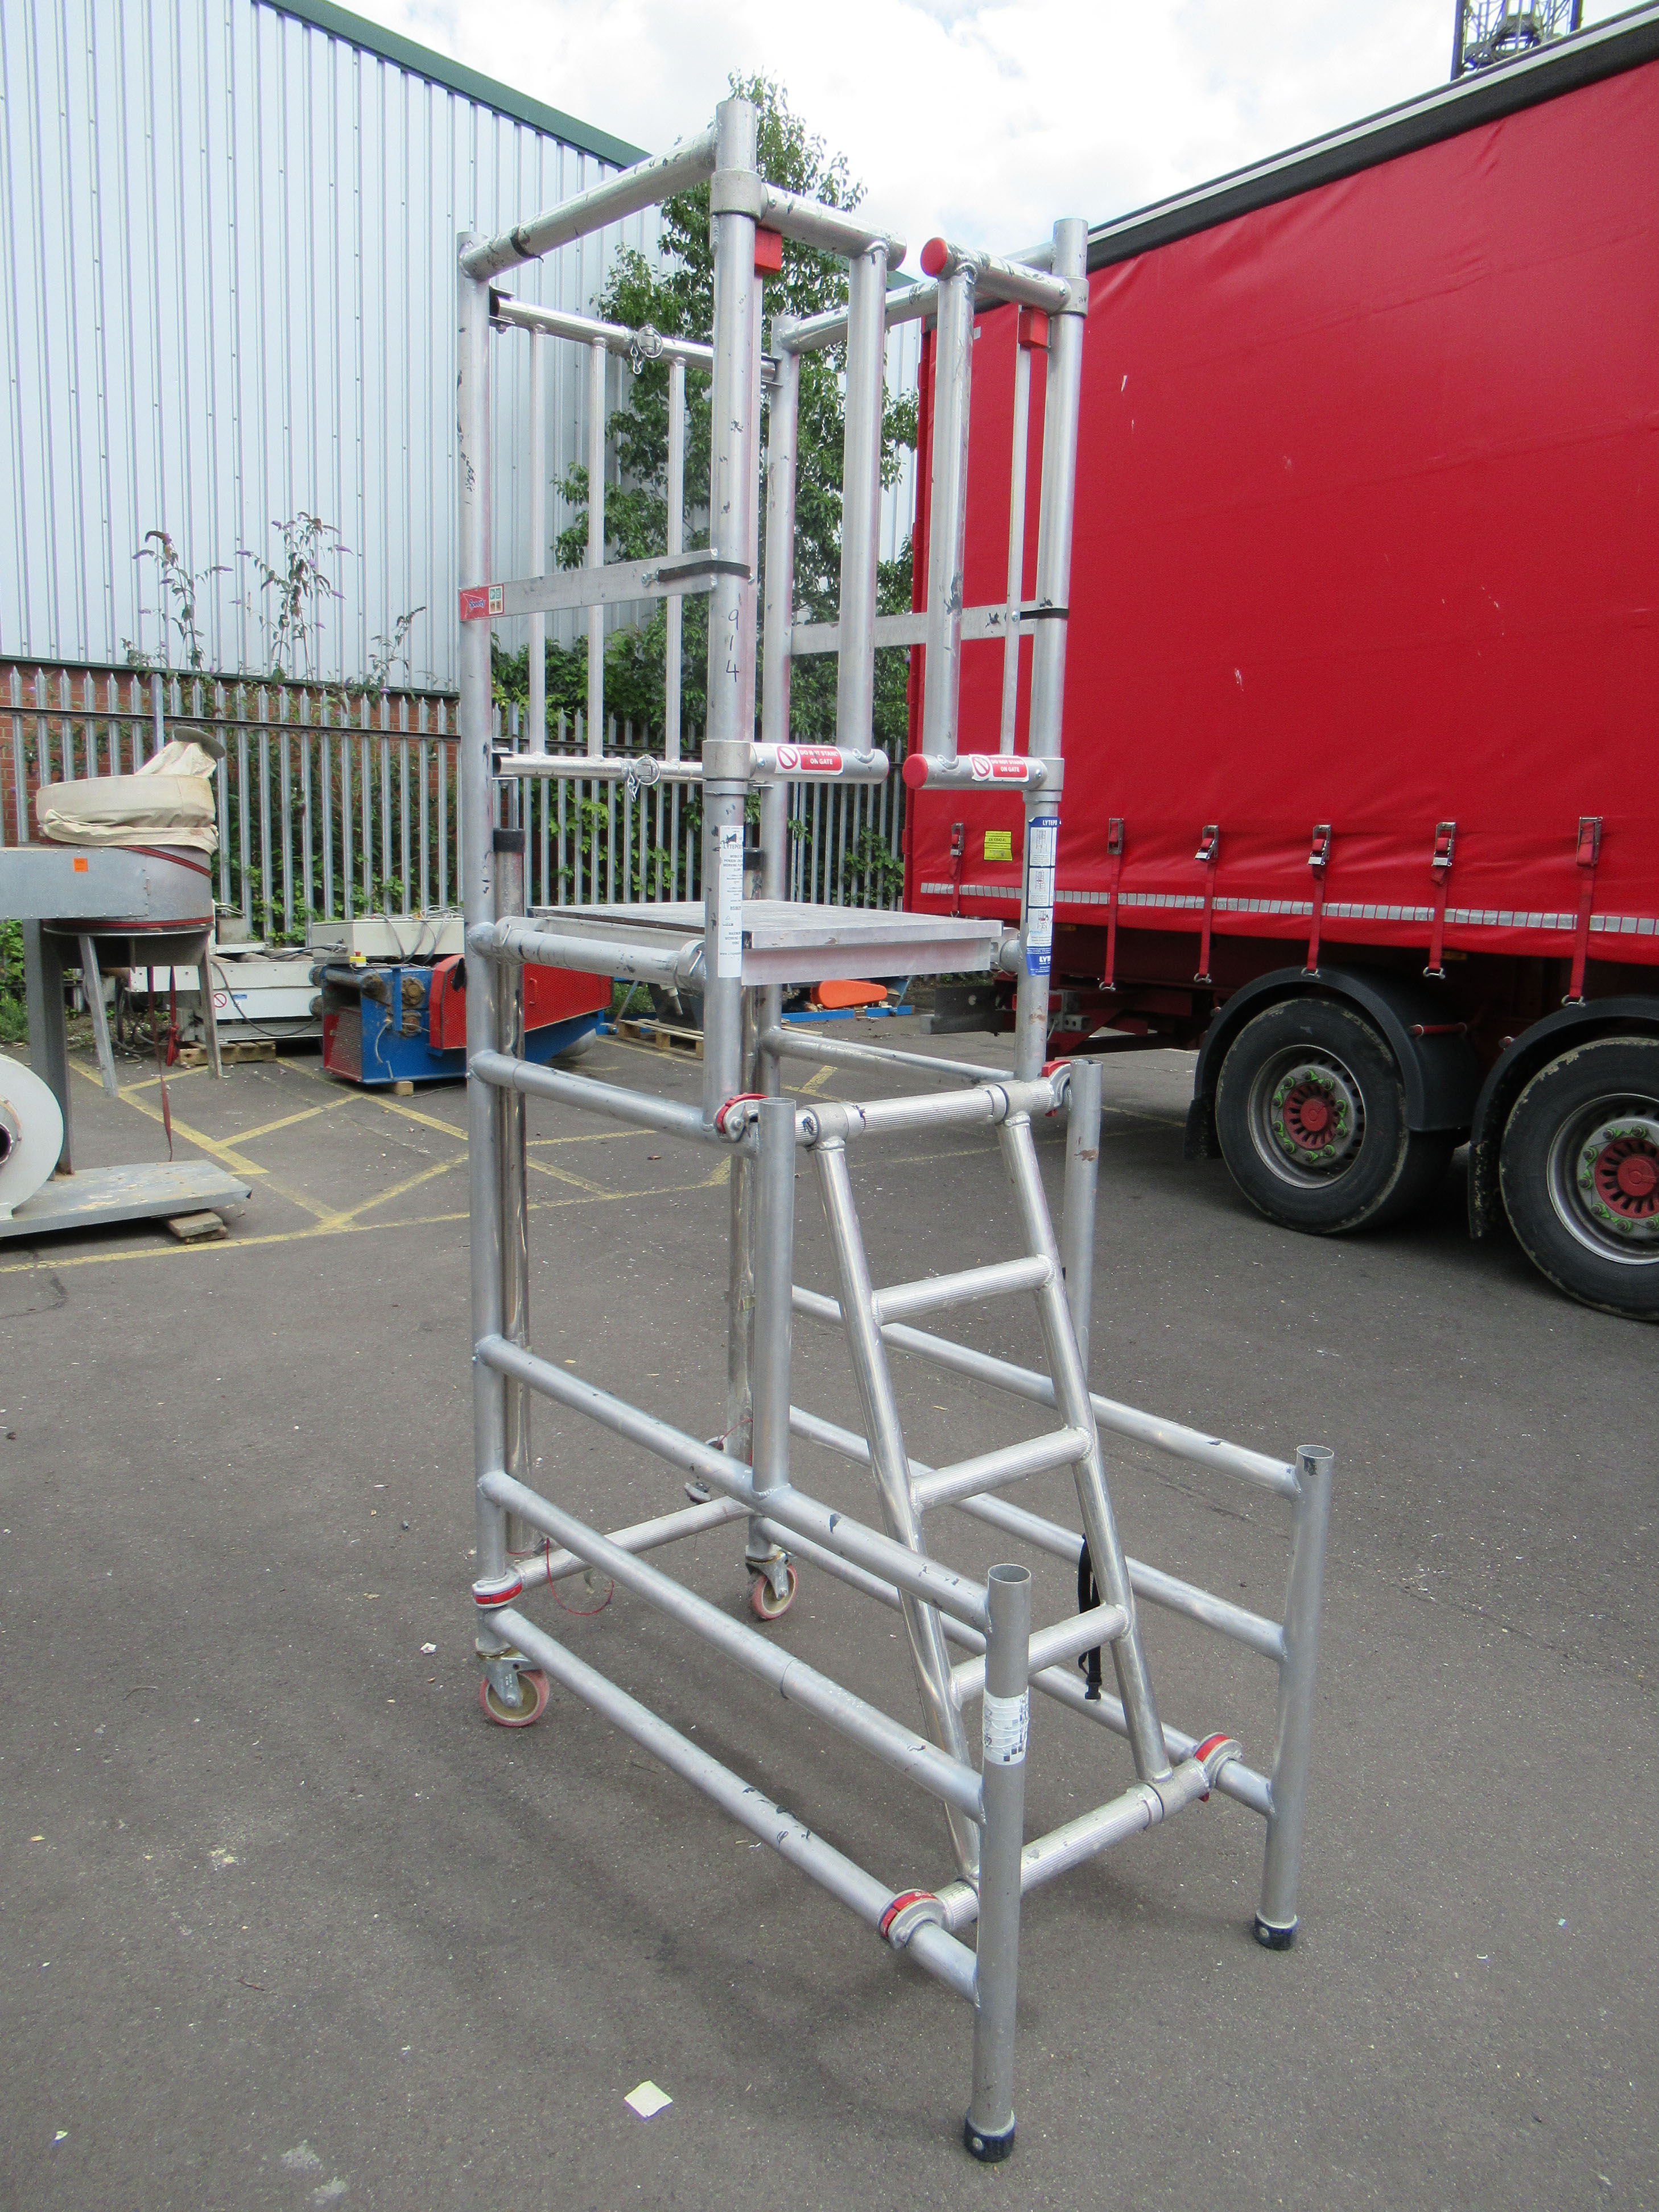 LYTEPOD15X Mobile 1 Person Low Level Working Platform. Max working load 150kg - Image 2 of 3